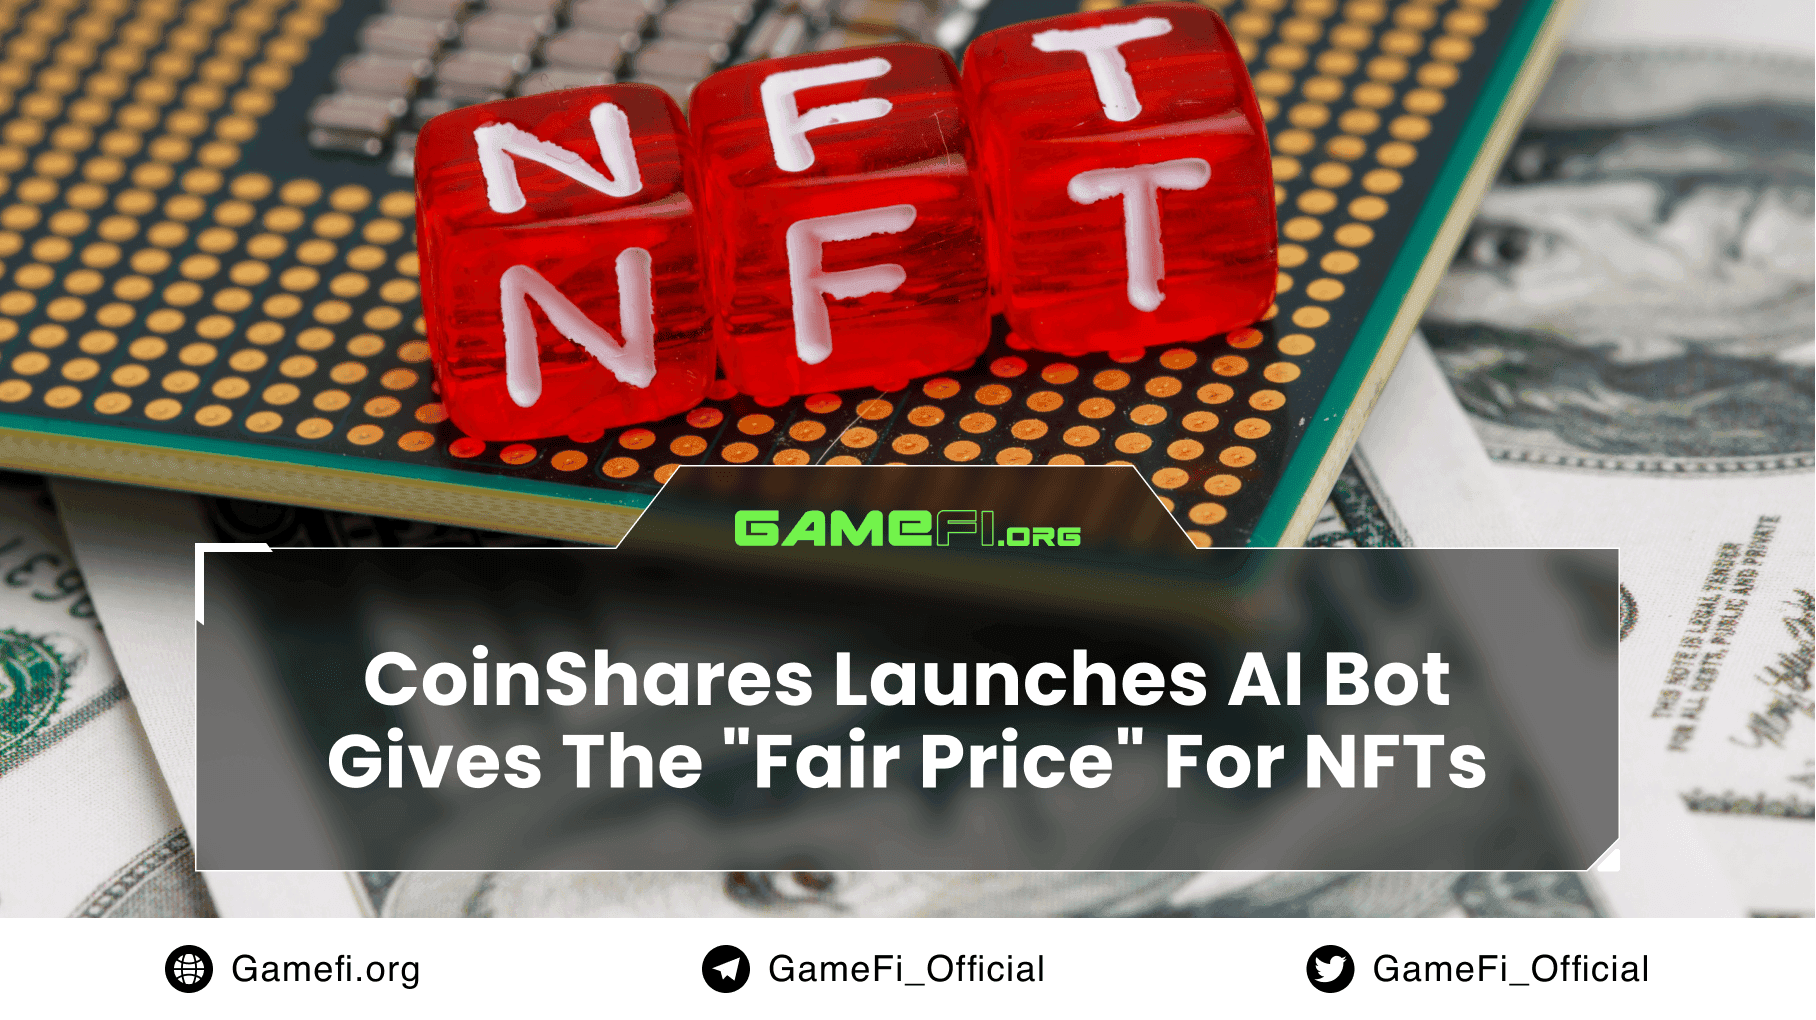 CoinShares Launches AI Bot that Gives the "Fair Price" for NFTs